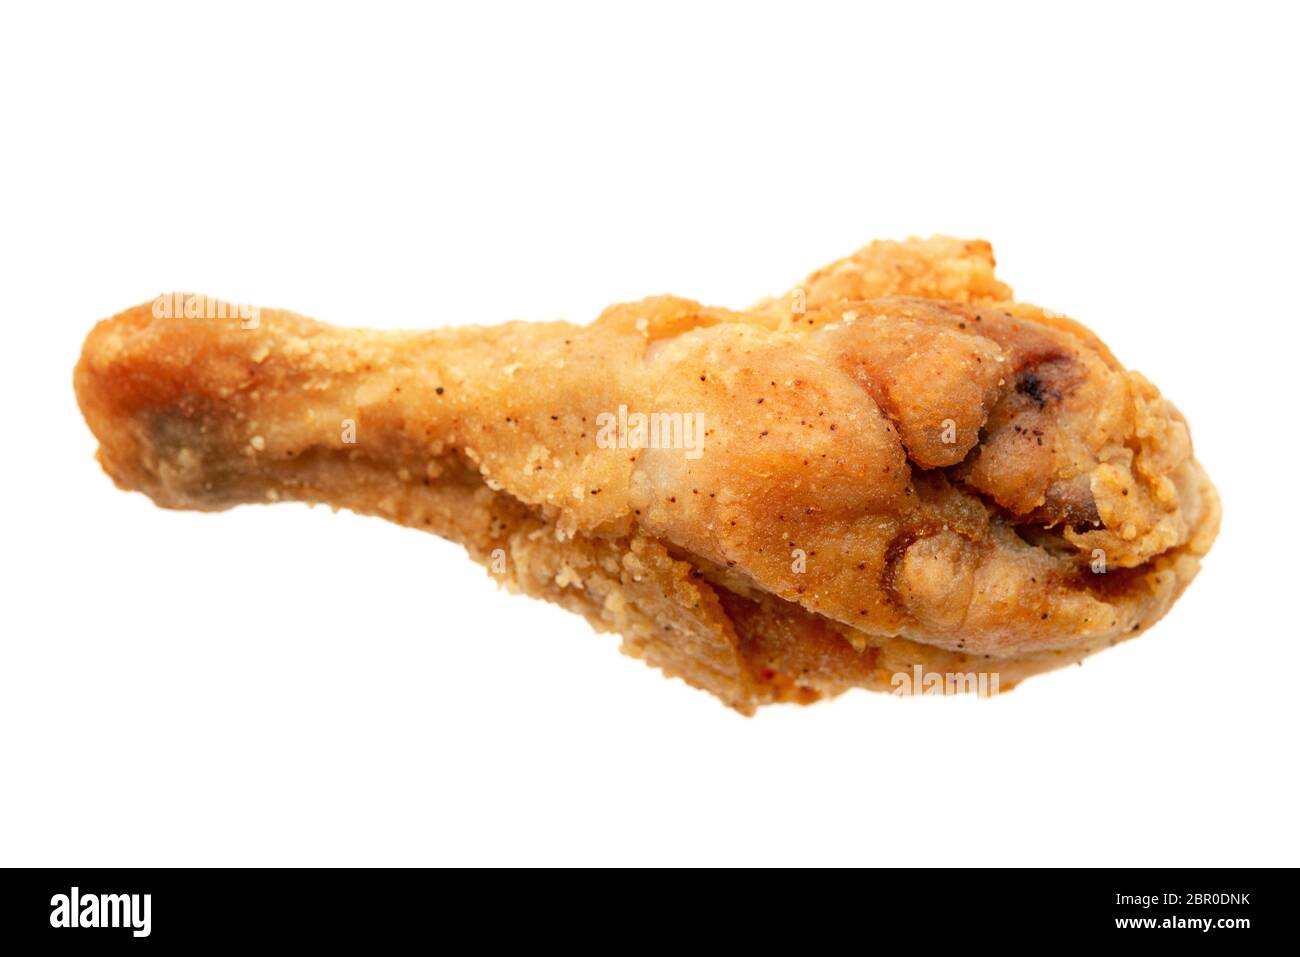 Original recipe fried chicken drumstick, isolated on white background. Stock Photo